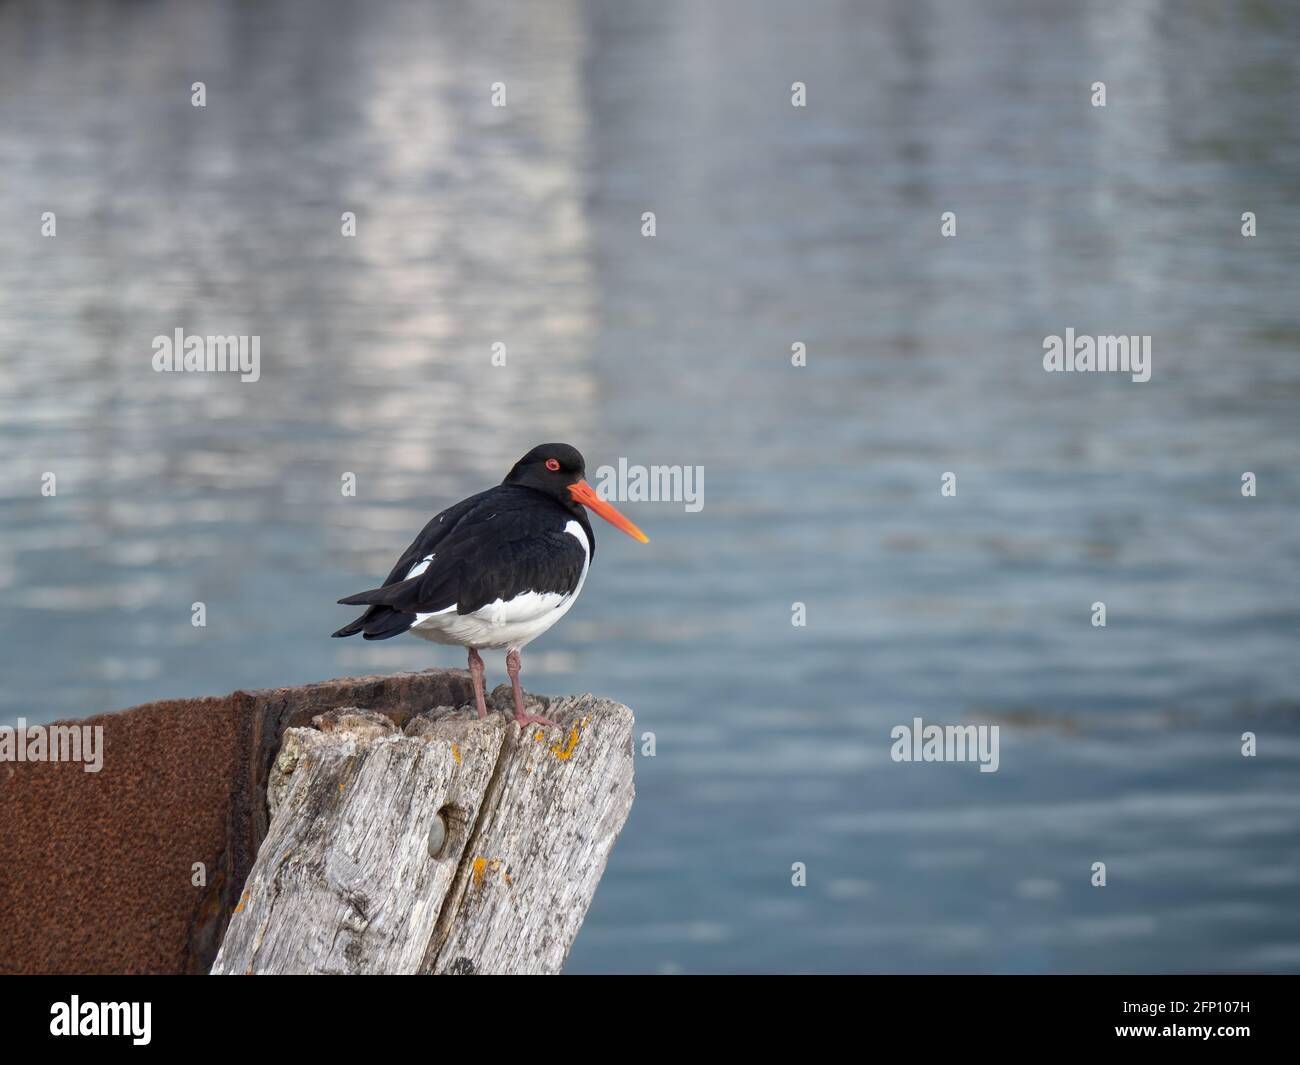 Oyster Catcher perched on a harbour wall, water behind. Stock Photo